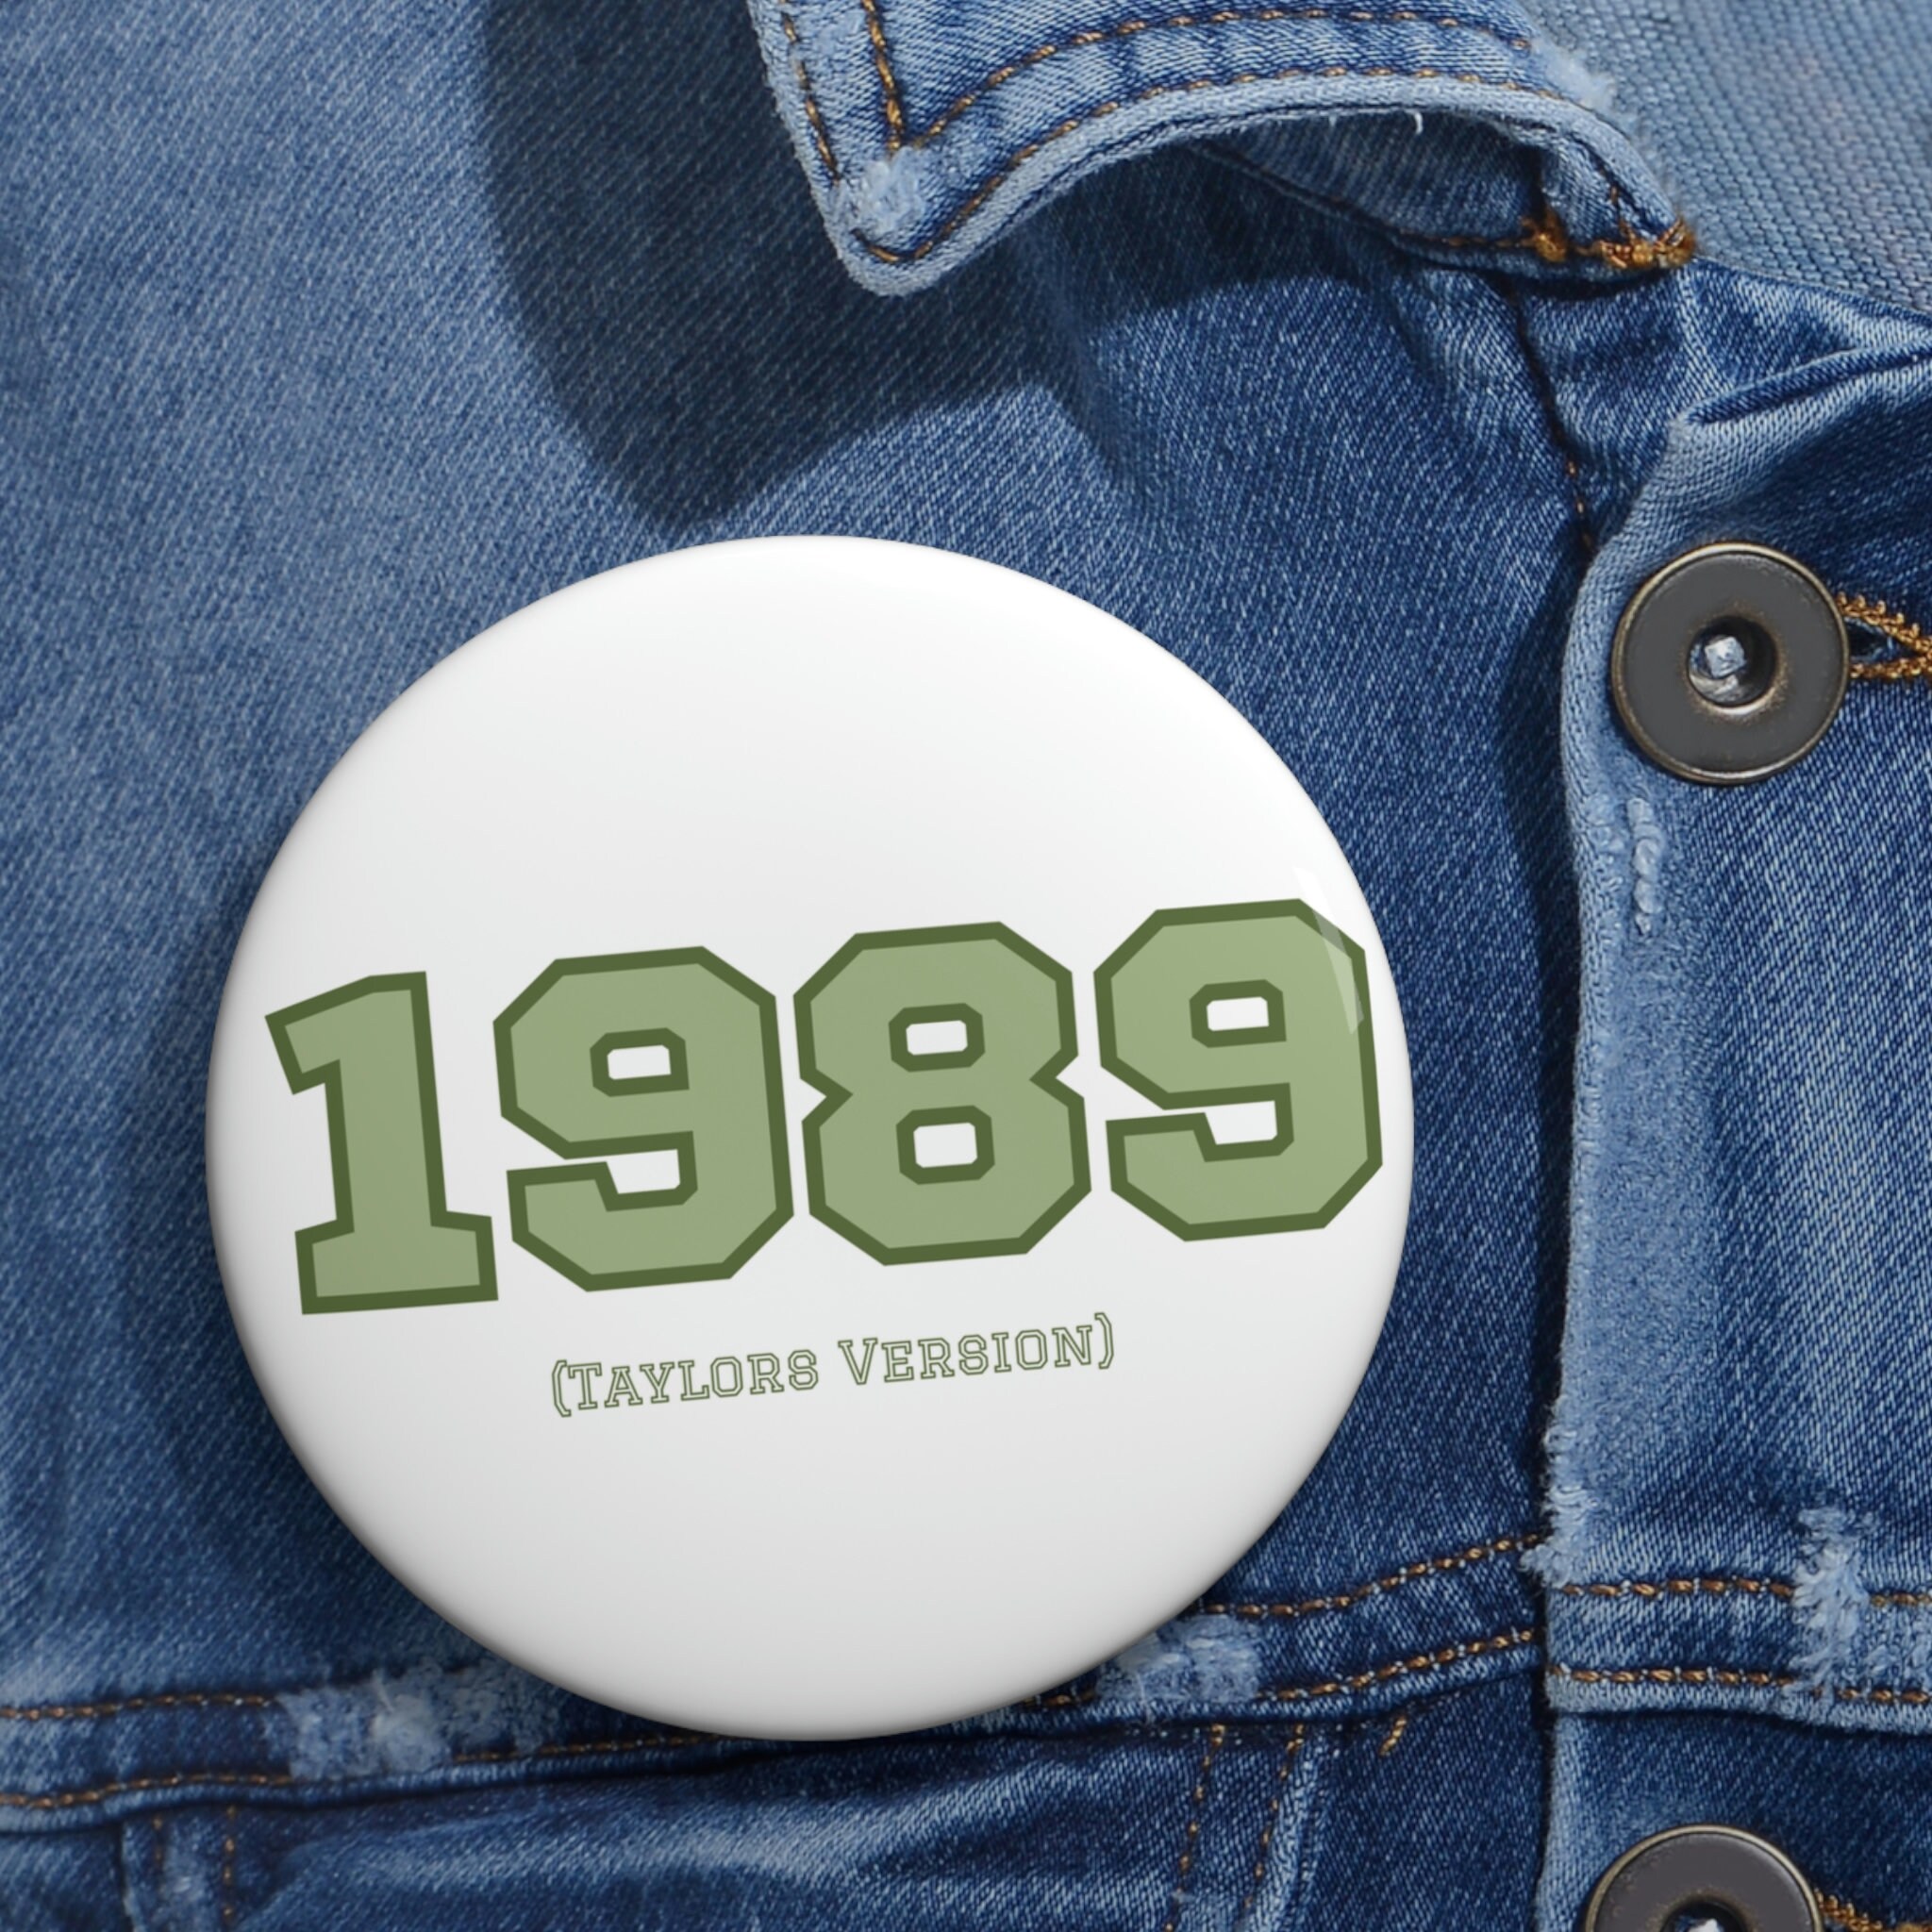 Taylor 1989 Pin Button